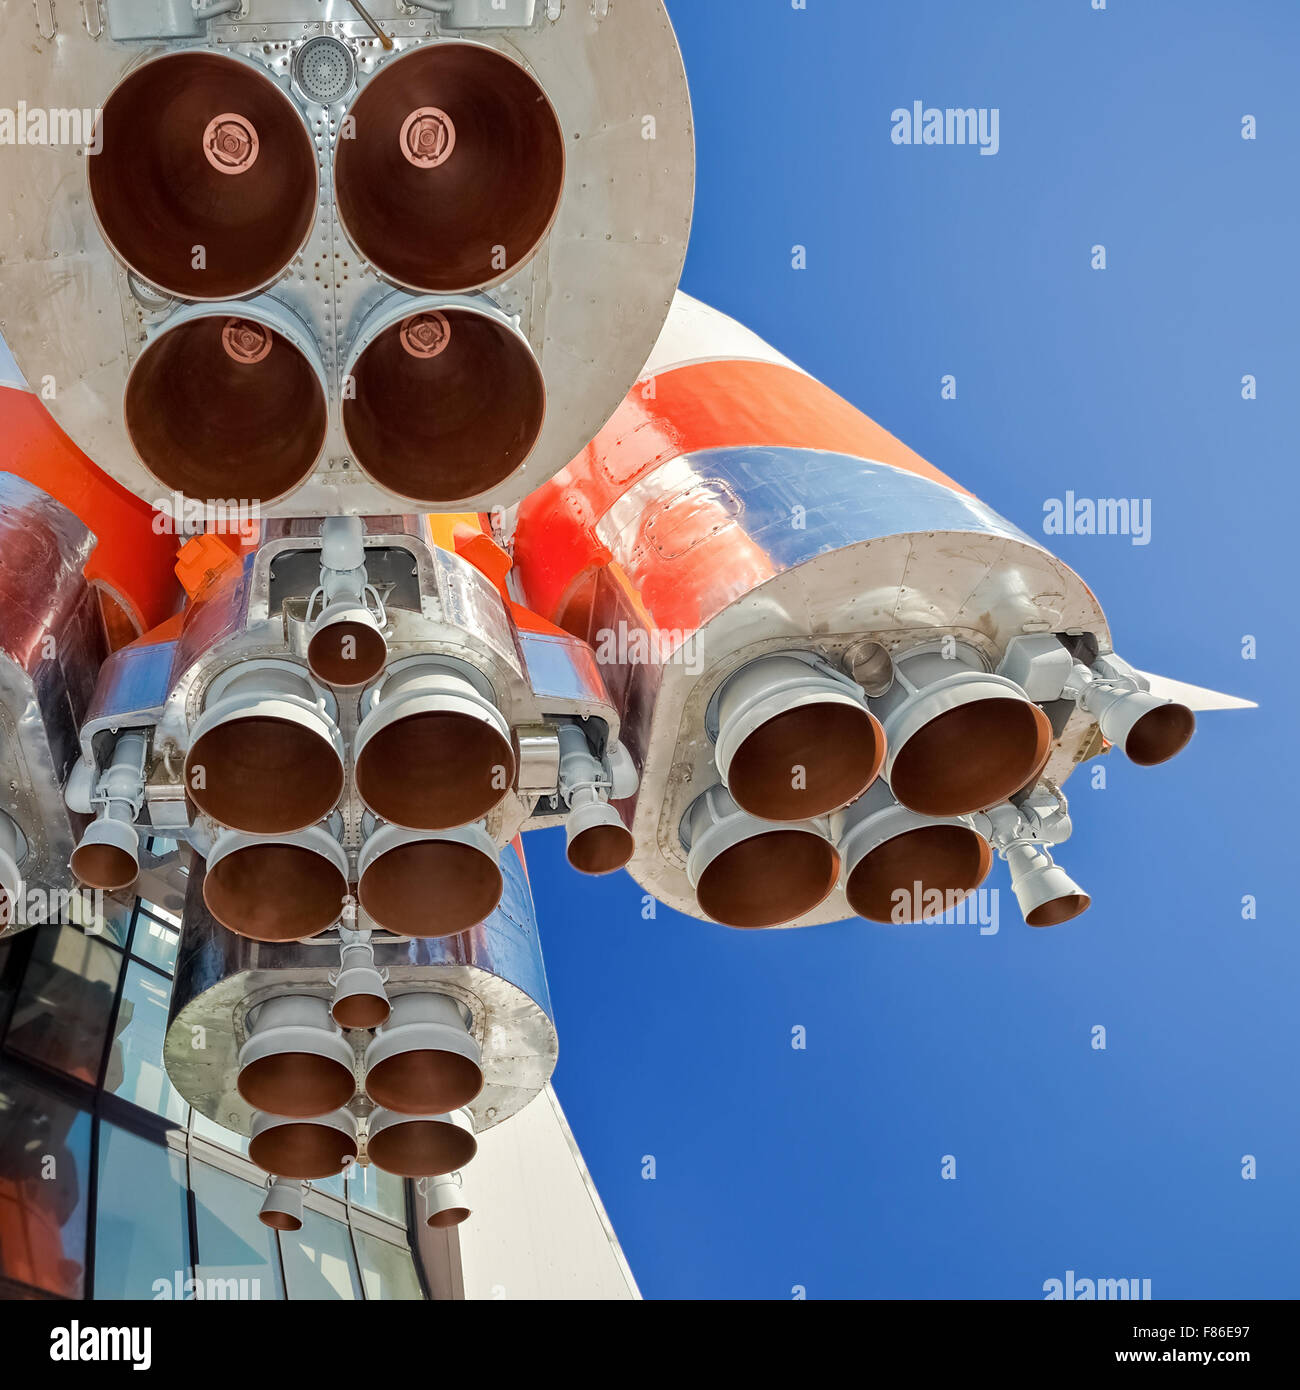 Details of space rocket engine Stock Photo